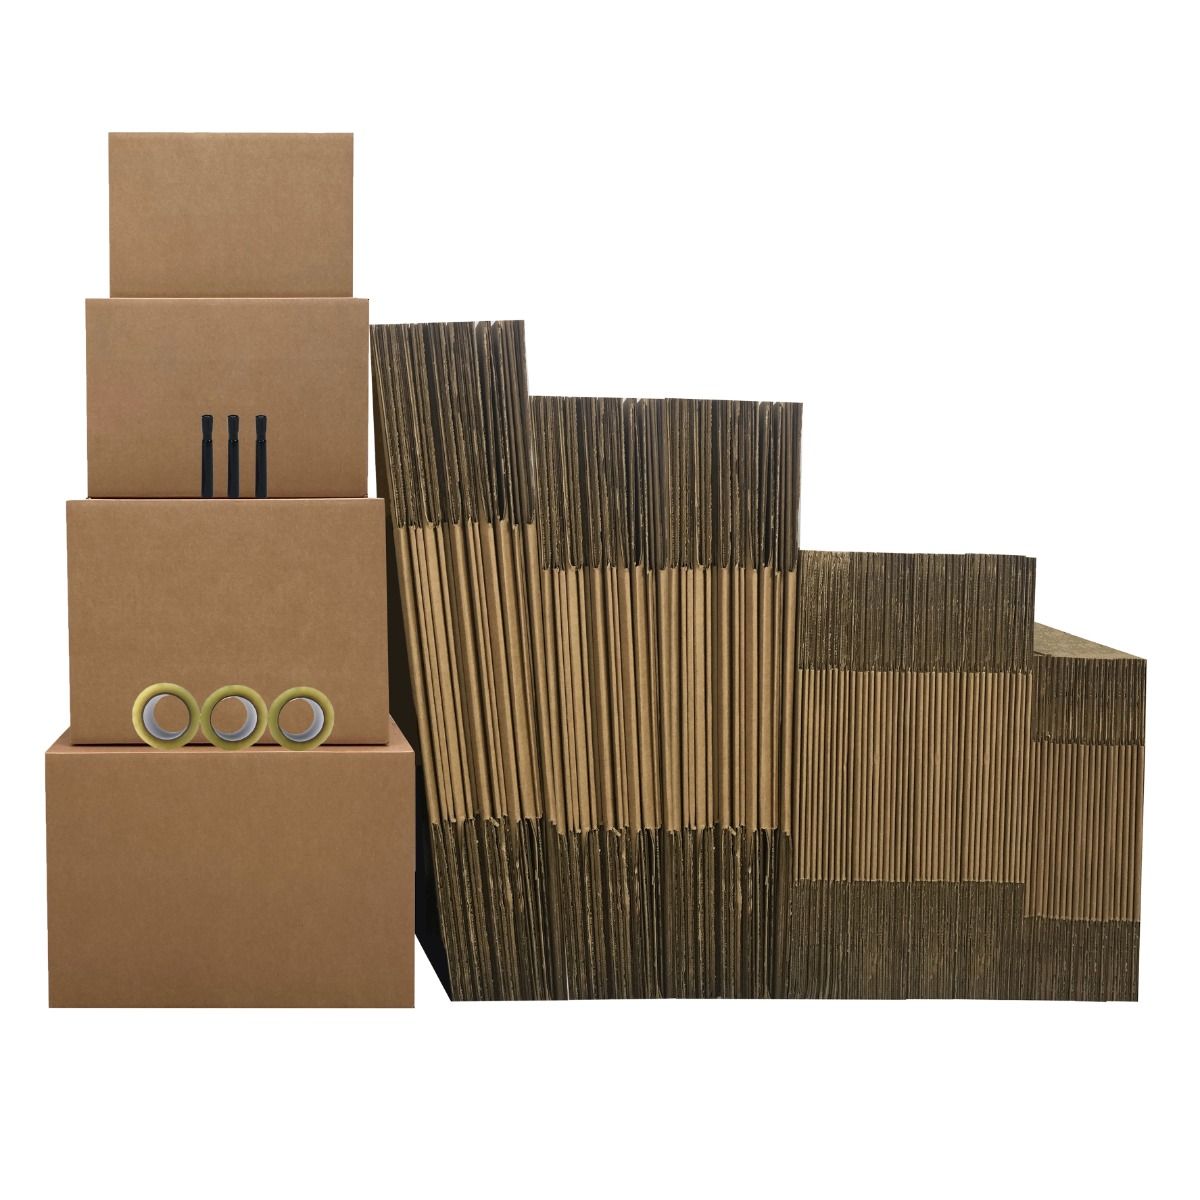  uBoxes Moving Boxes Bundle of 16x10x10 (Small